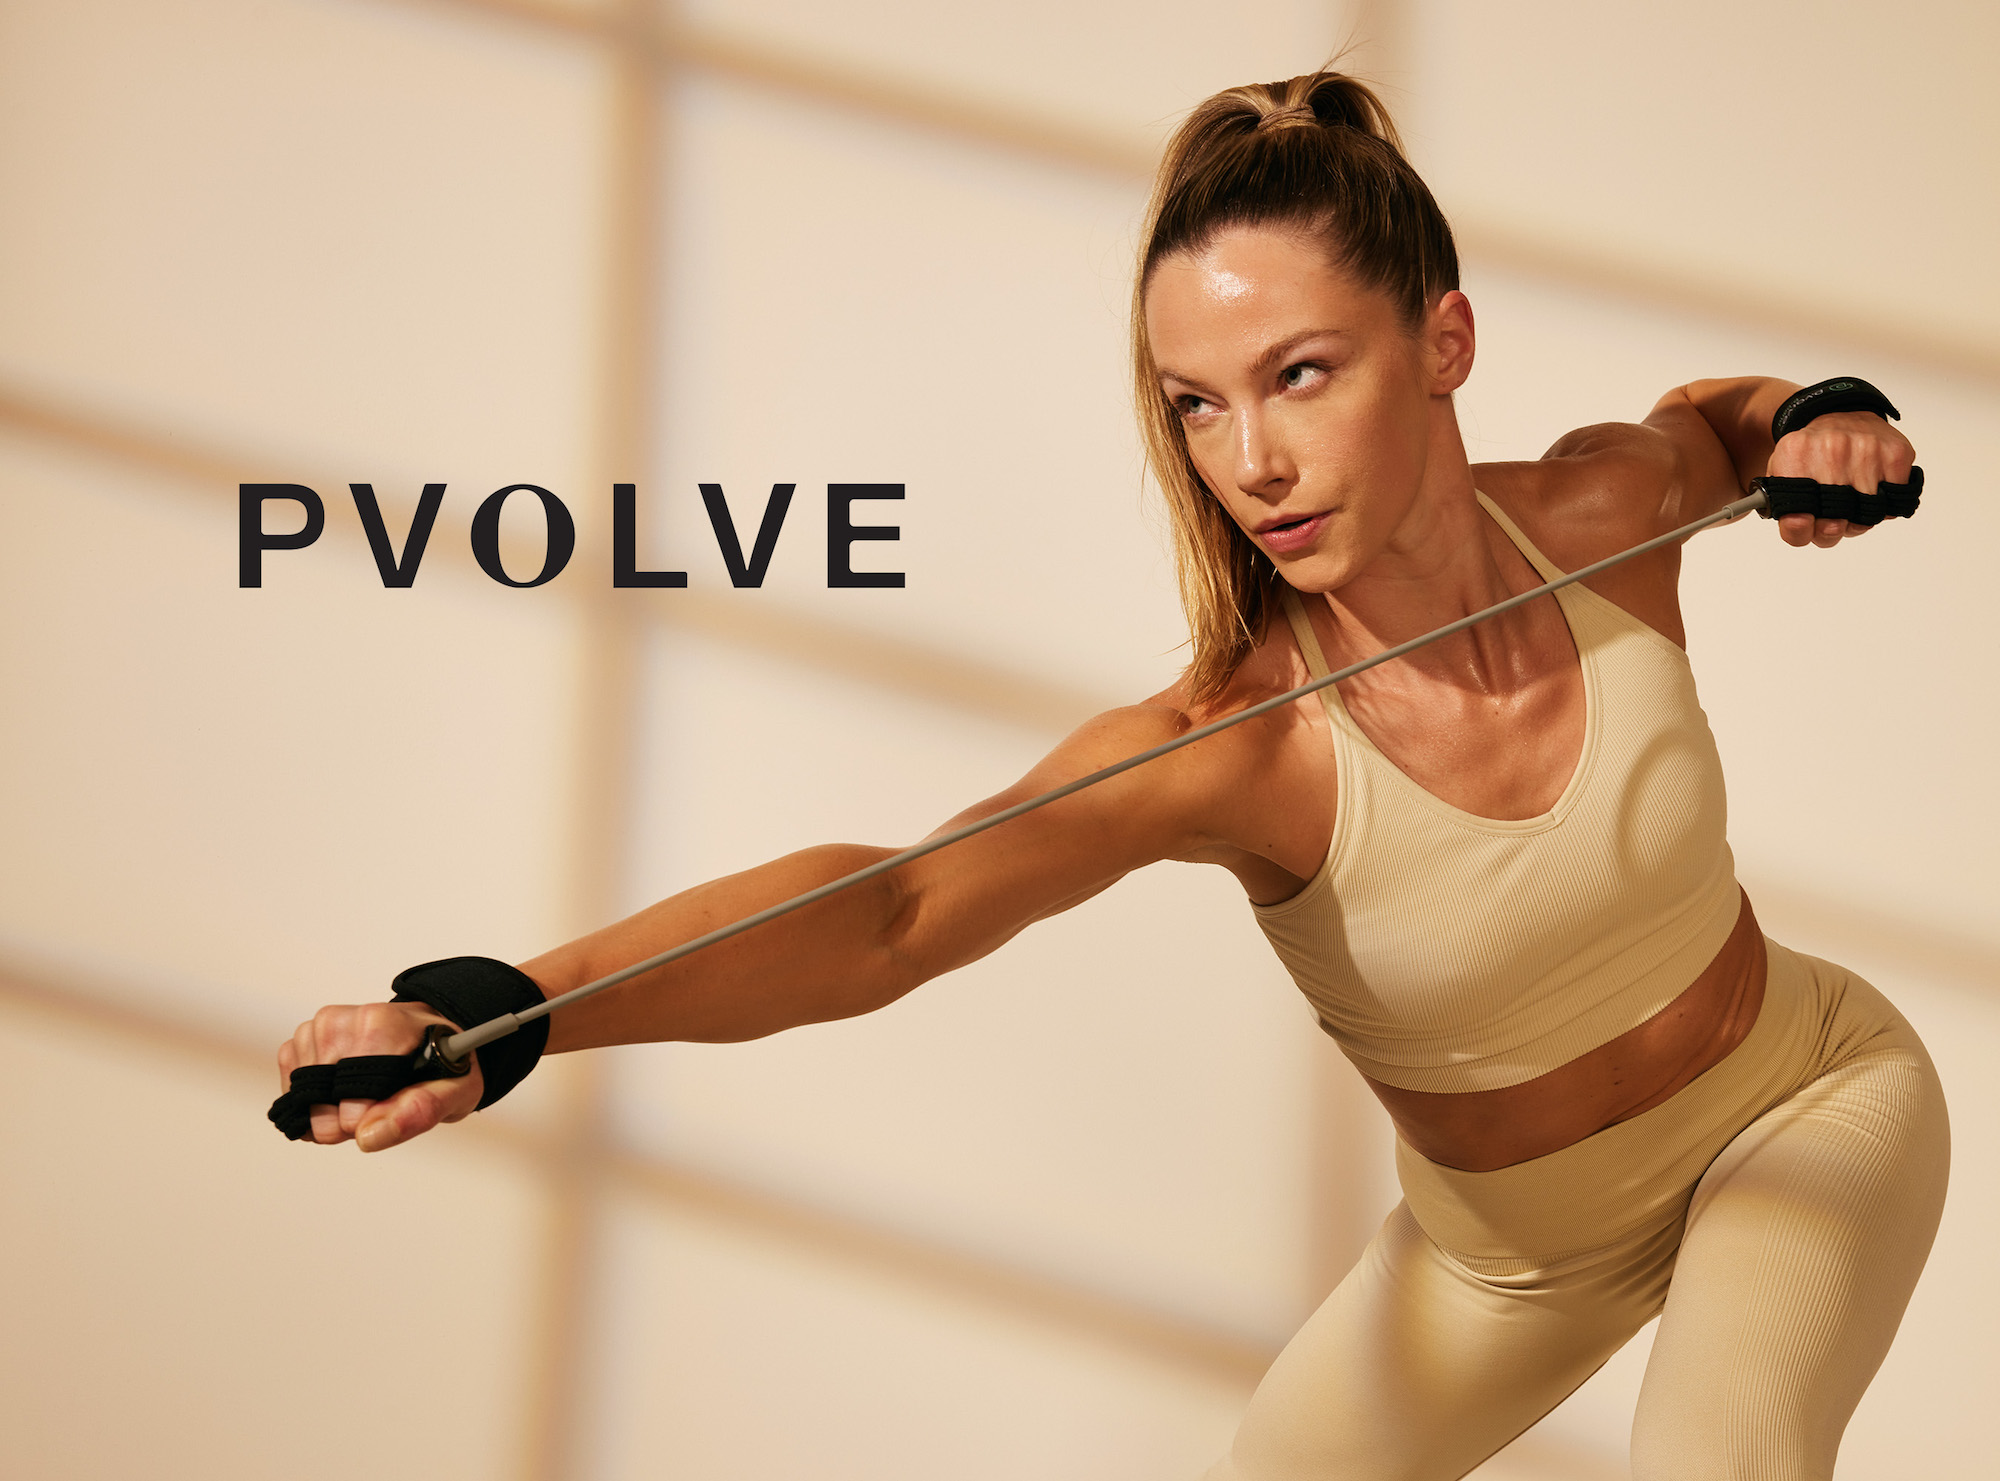 Participants engaging in a Pvolve workout at Studio Flex45 in Ventura, CA.